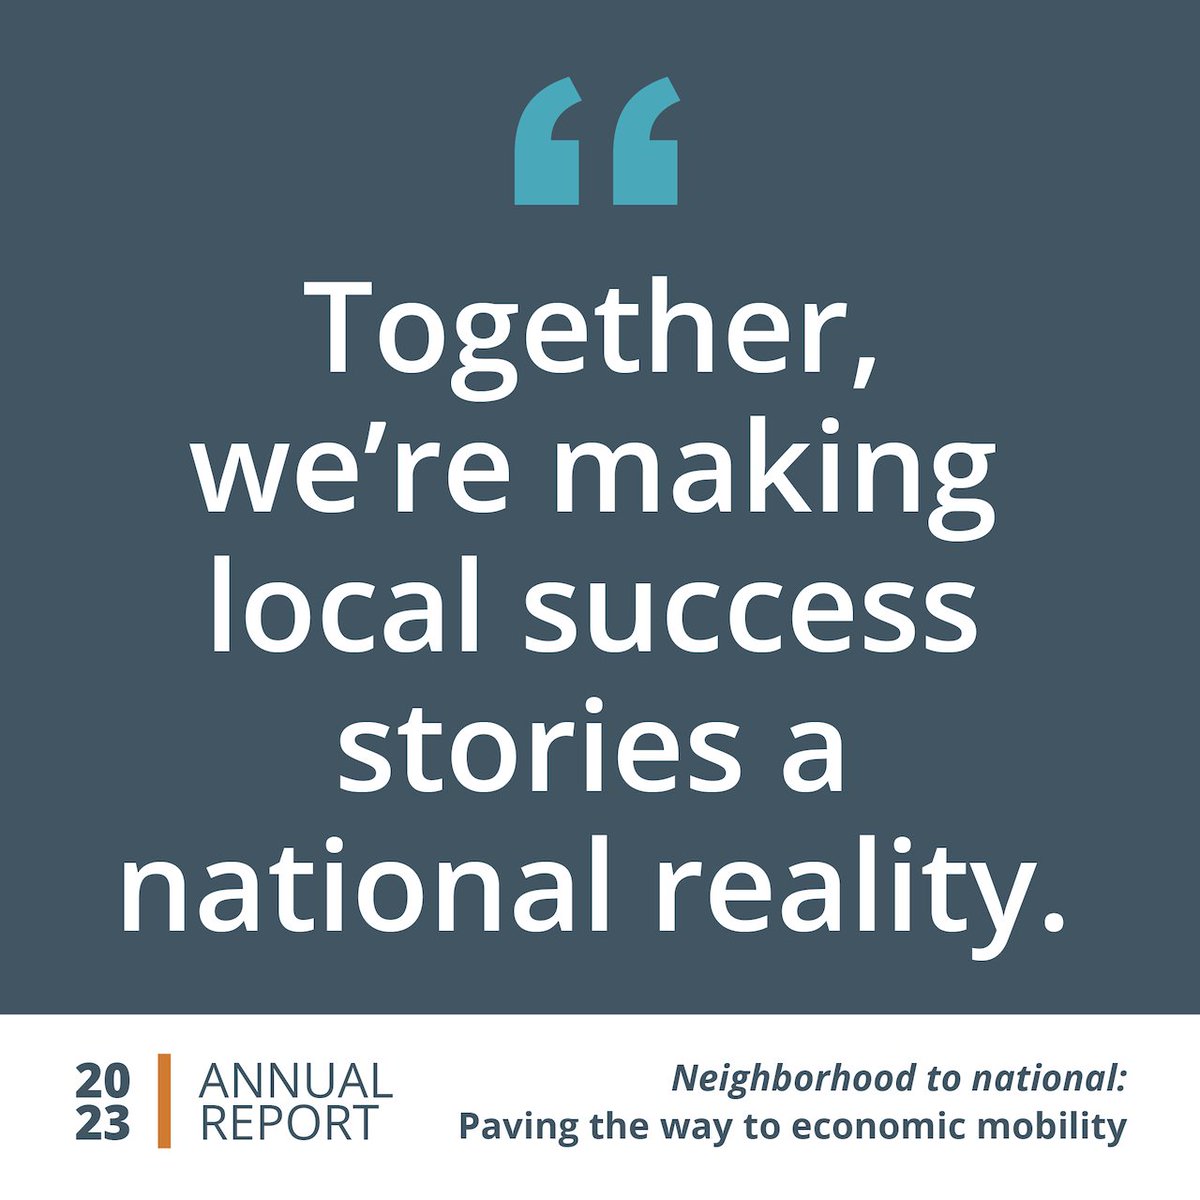 We know our bold 2030 goal is possible because #CradleToCareer Network members are already transforming systems, expanding opportunities and getting better, more equitable outcomes. See their impact in our 2023 annual report, #NeighborhoodToNational: hubs.li/Q02vgb2l0